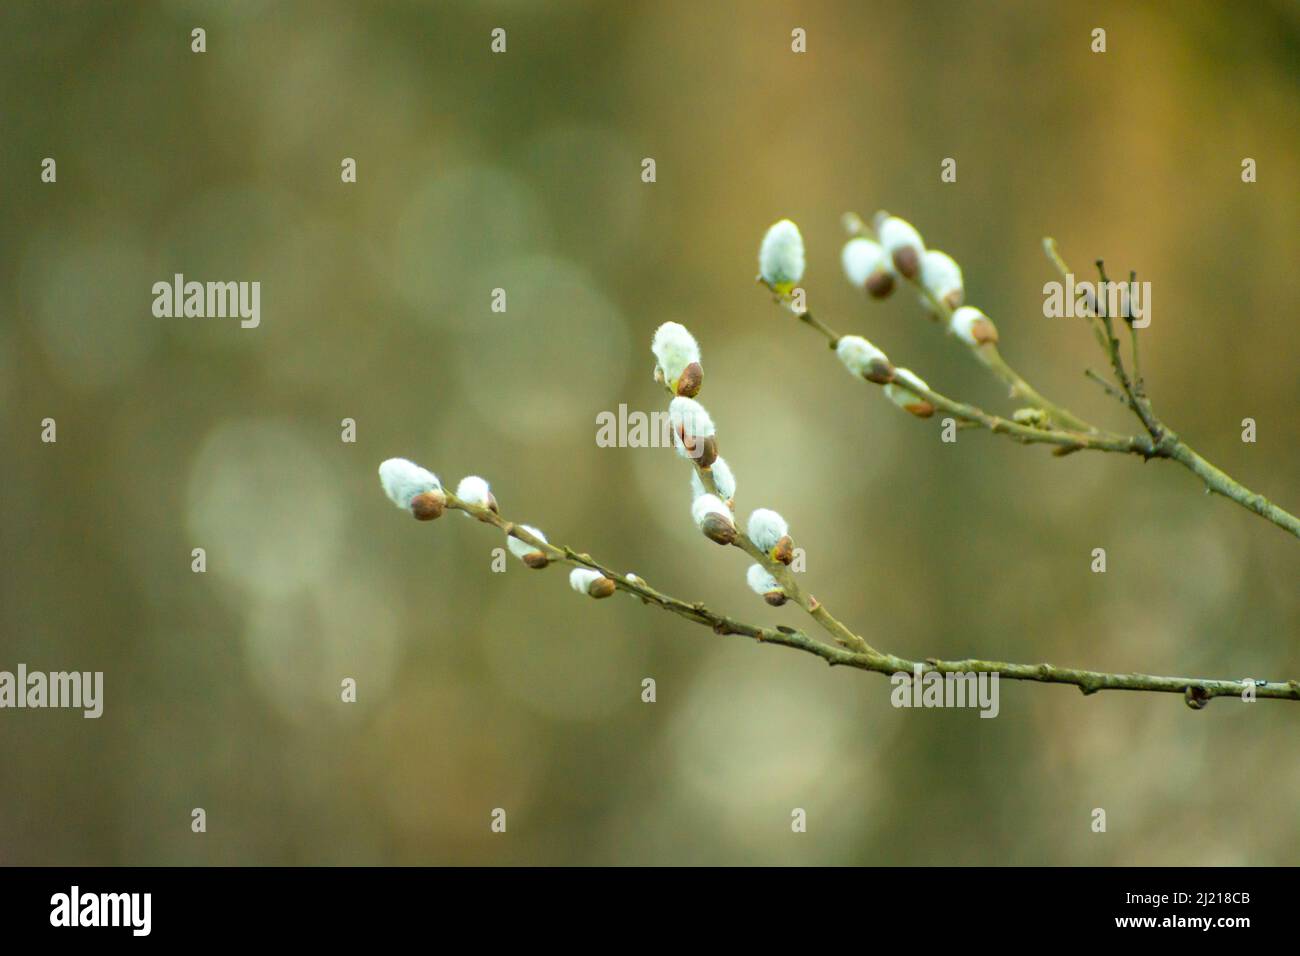 Twigs with white fluffy catkins and blurred background, spring view Stock Photo